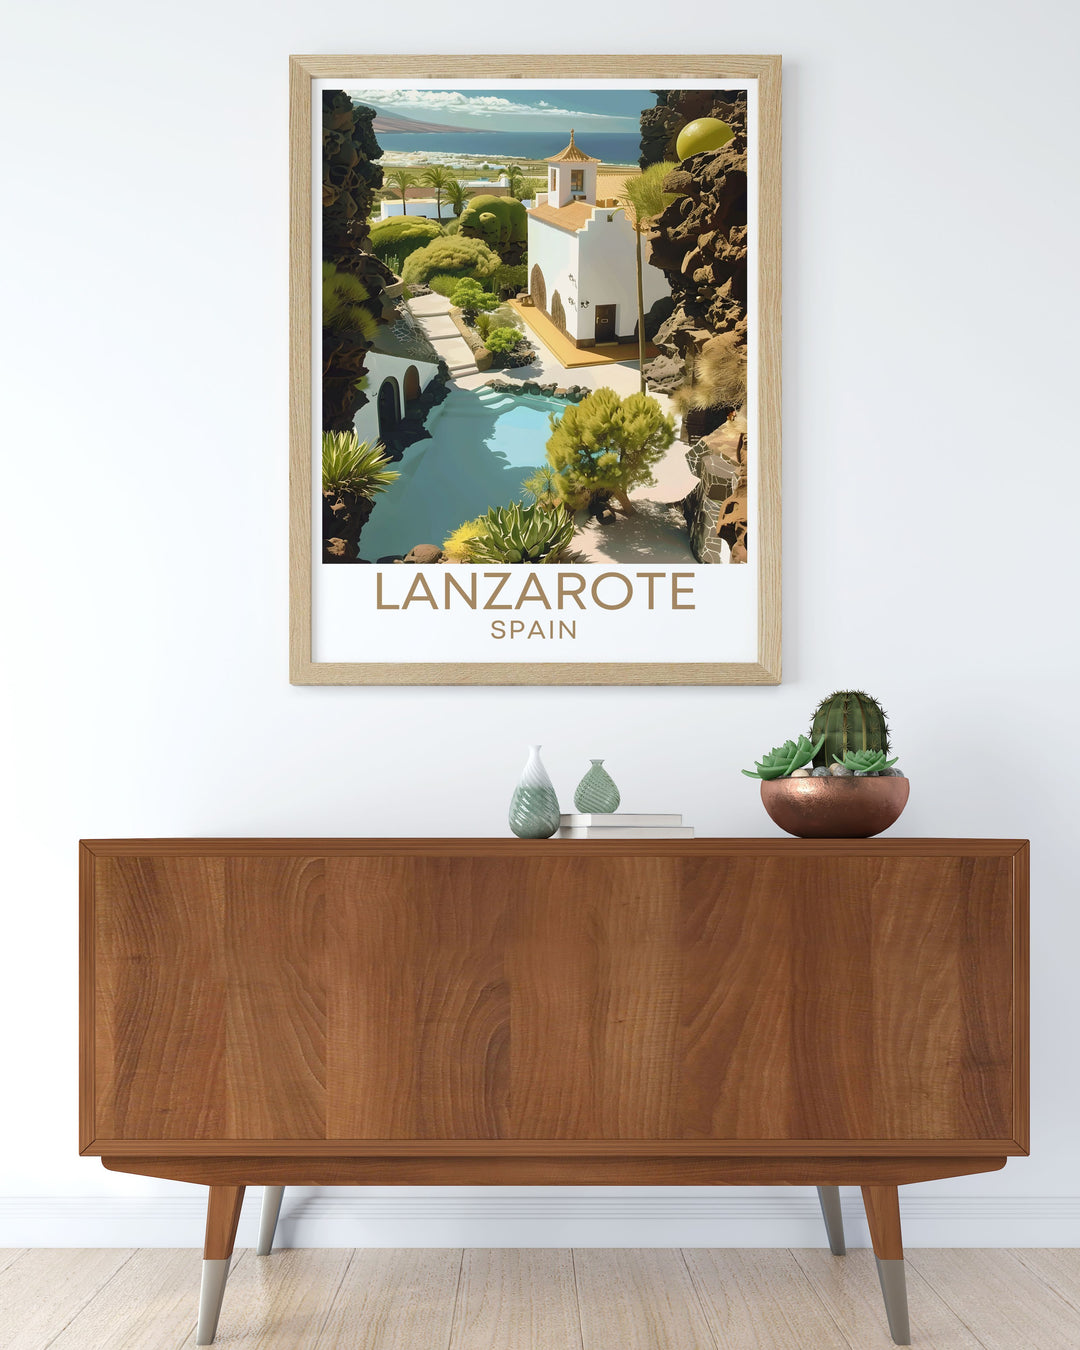 Showcasing the Cesar Manrique Foundation, this poster reflects the artists innovative use of Lanzarotes natural formations, perfect for adding a unique touch of the Canary Islands artistic heritage to your home or office decor.